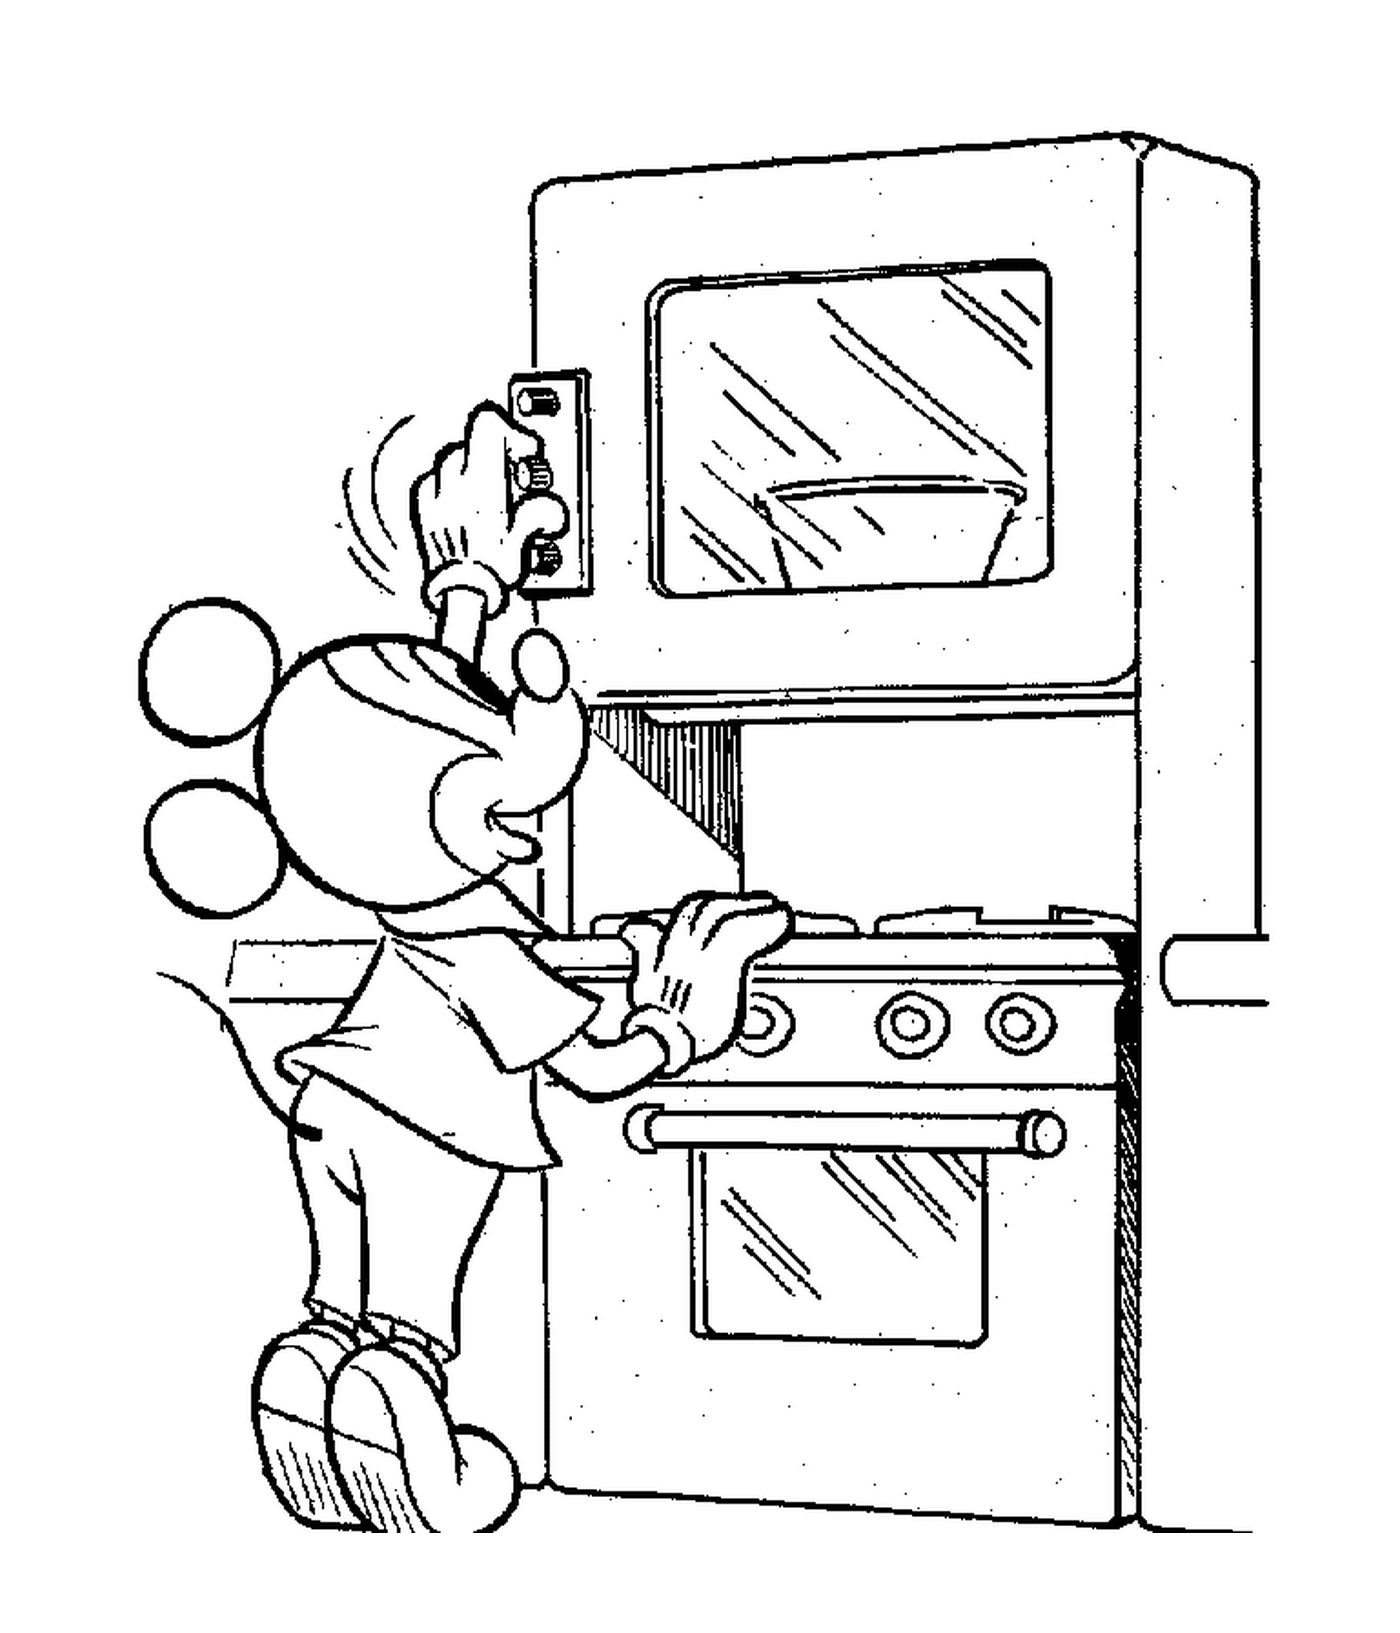  Mickey lights his oven: cartoon character cooking in a kitchen 